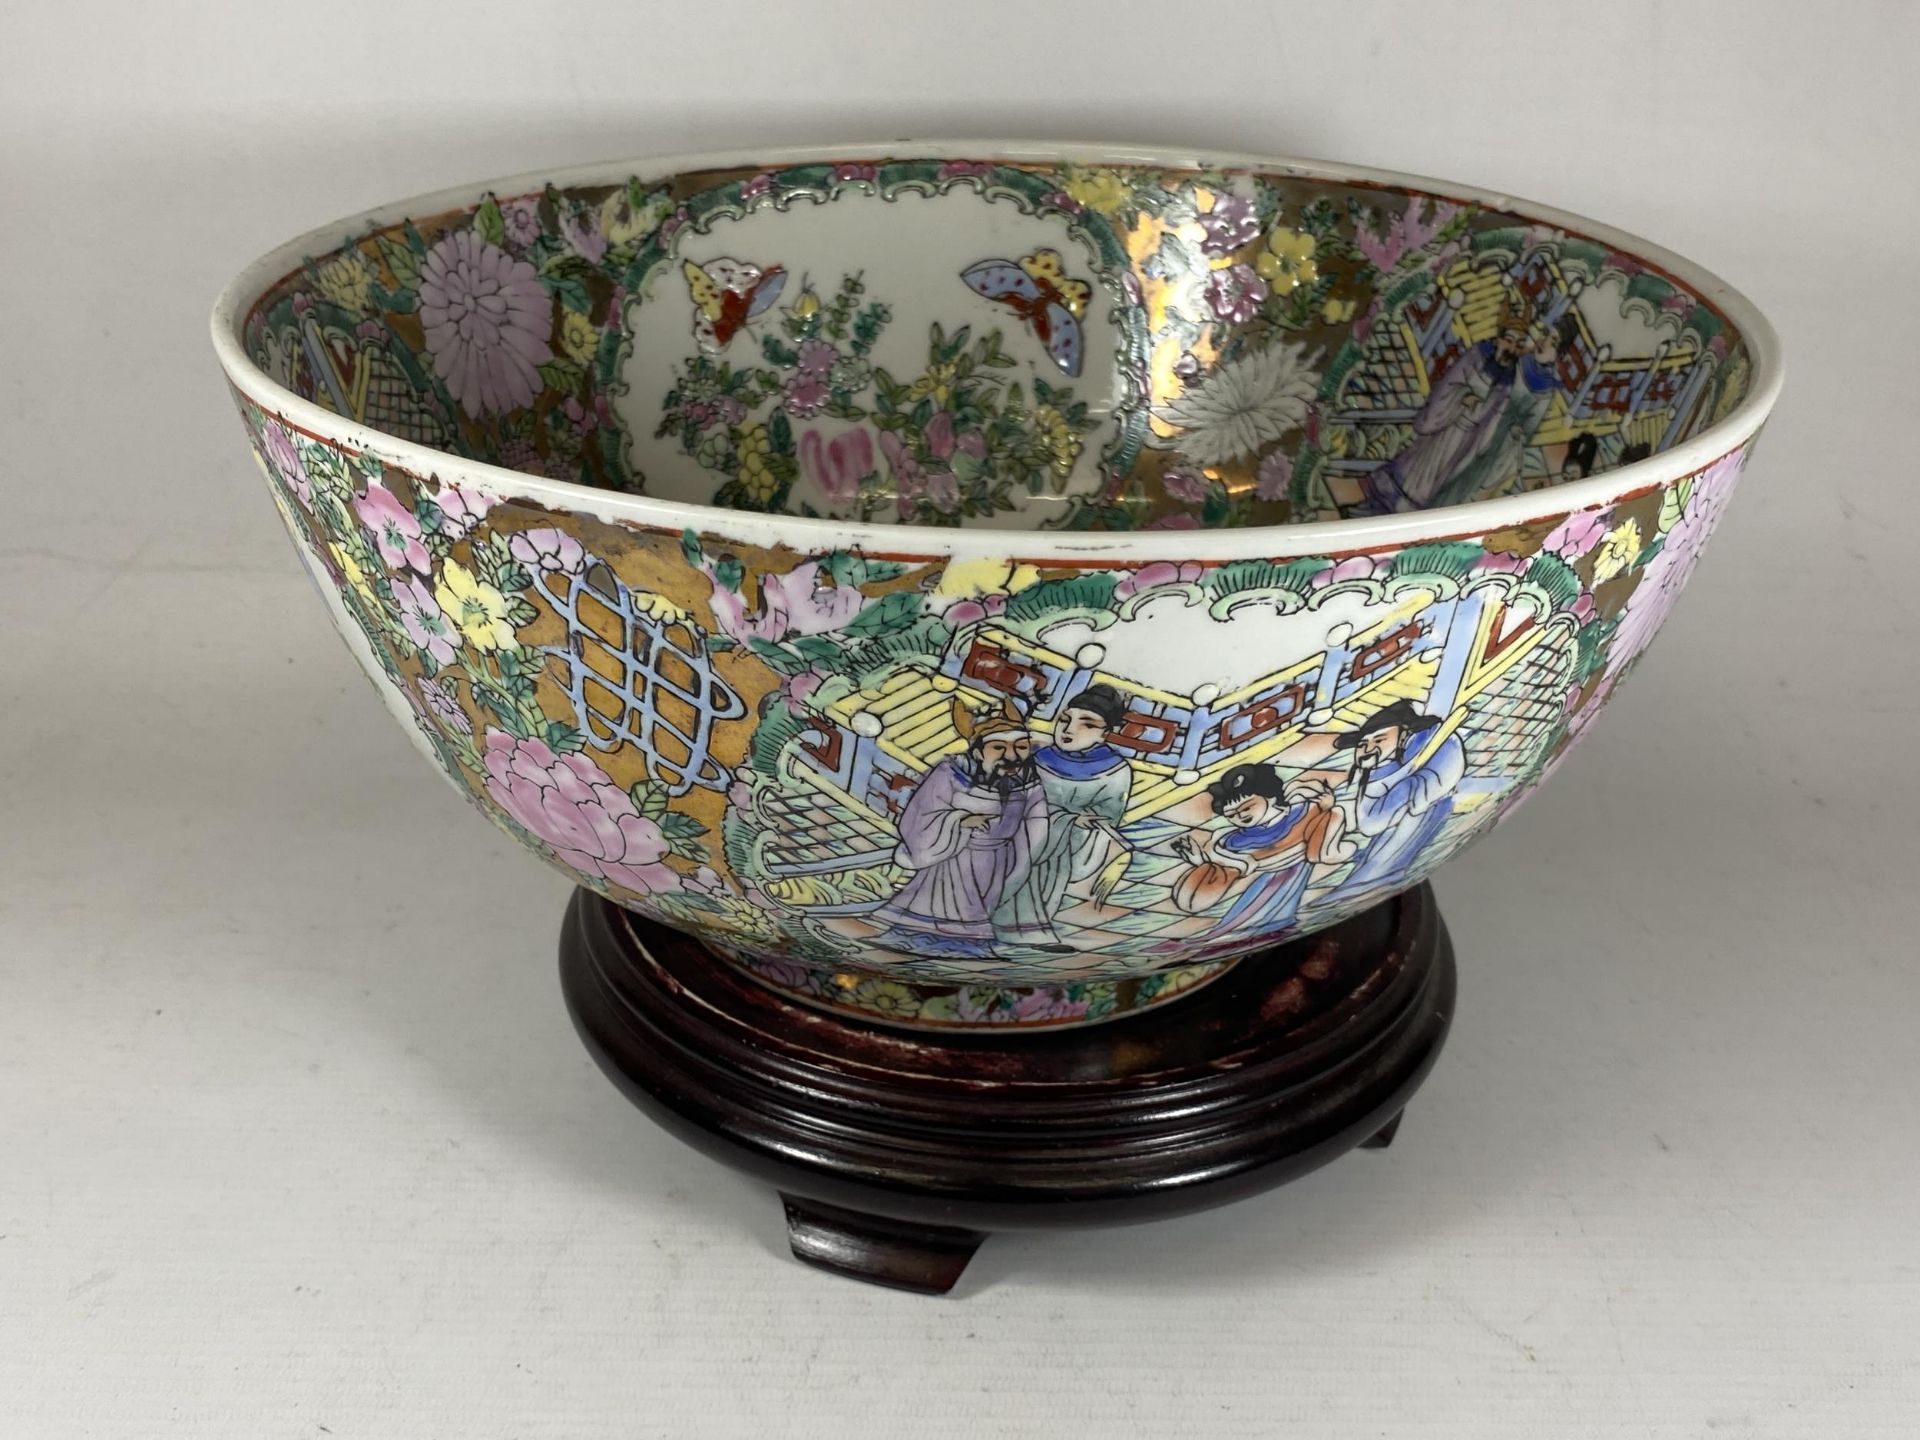 A LARGE CHINESE CANTON FAMILLE ROSE PUNCH BOWL DECORATED WITH ENAMELLED FIGURAL DESIGN ON A TURNED